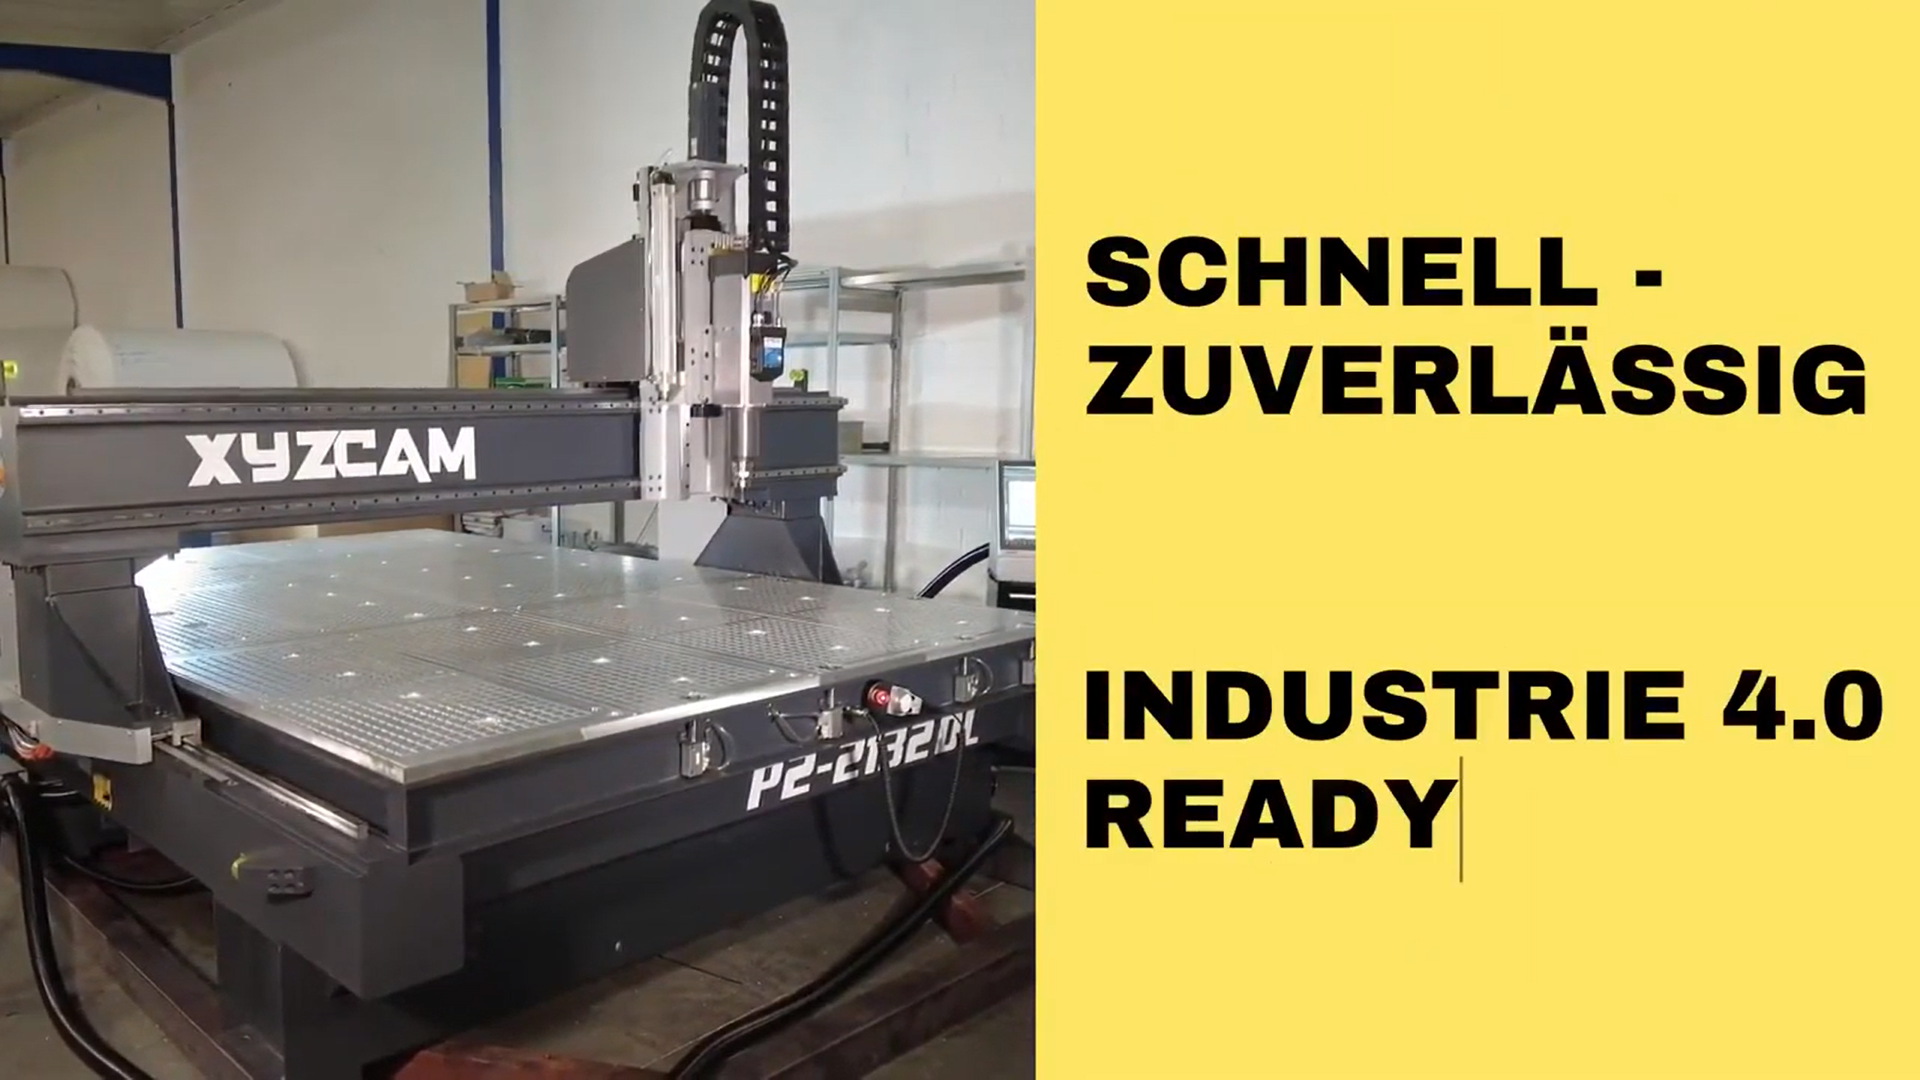 XYZCAM, P2-2132DL x BECKHOFF CNC solution ALL-IN-ONE